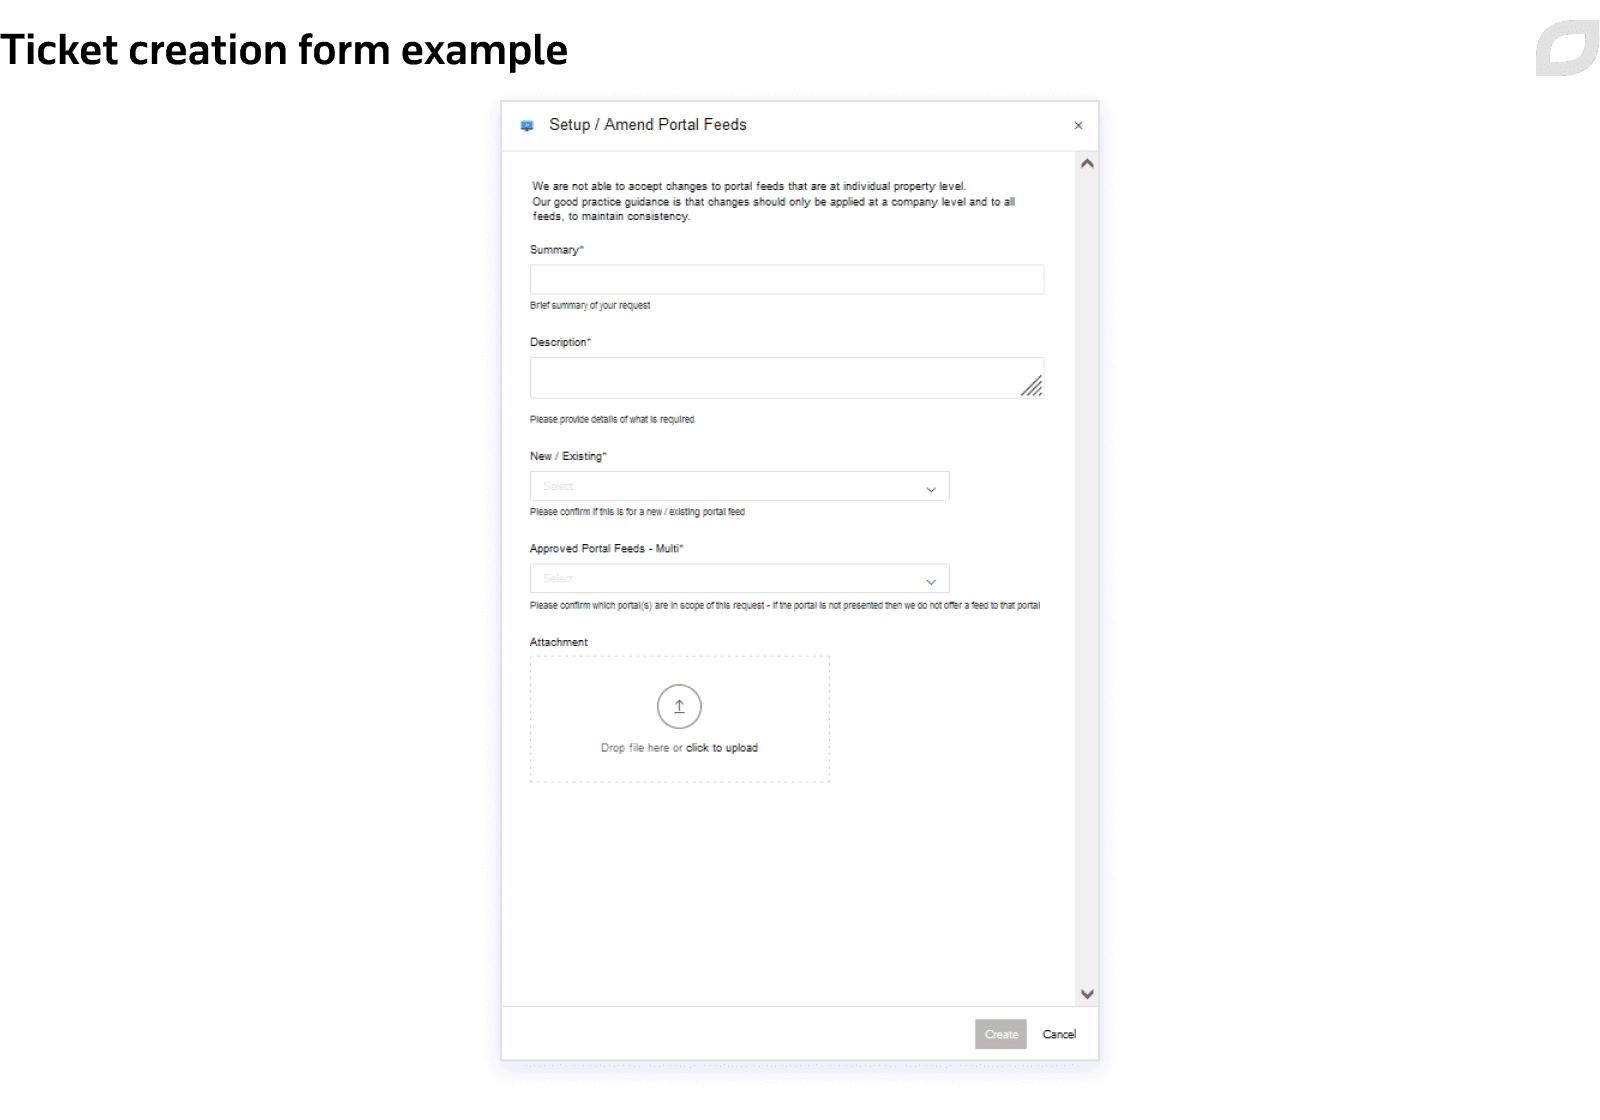 Ticket creation form example